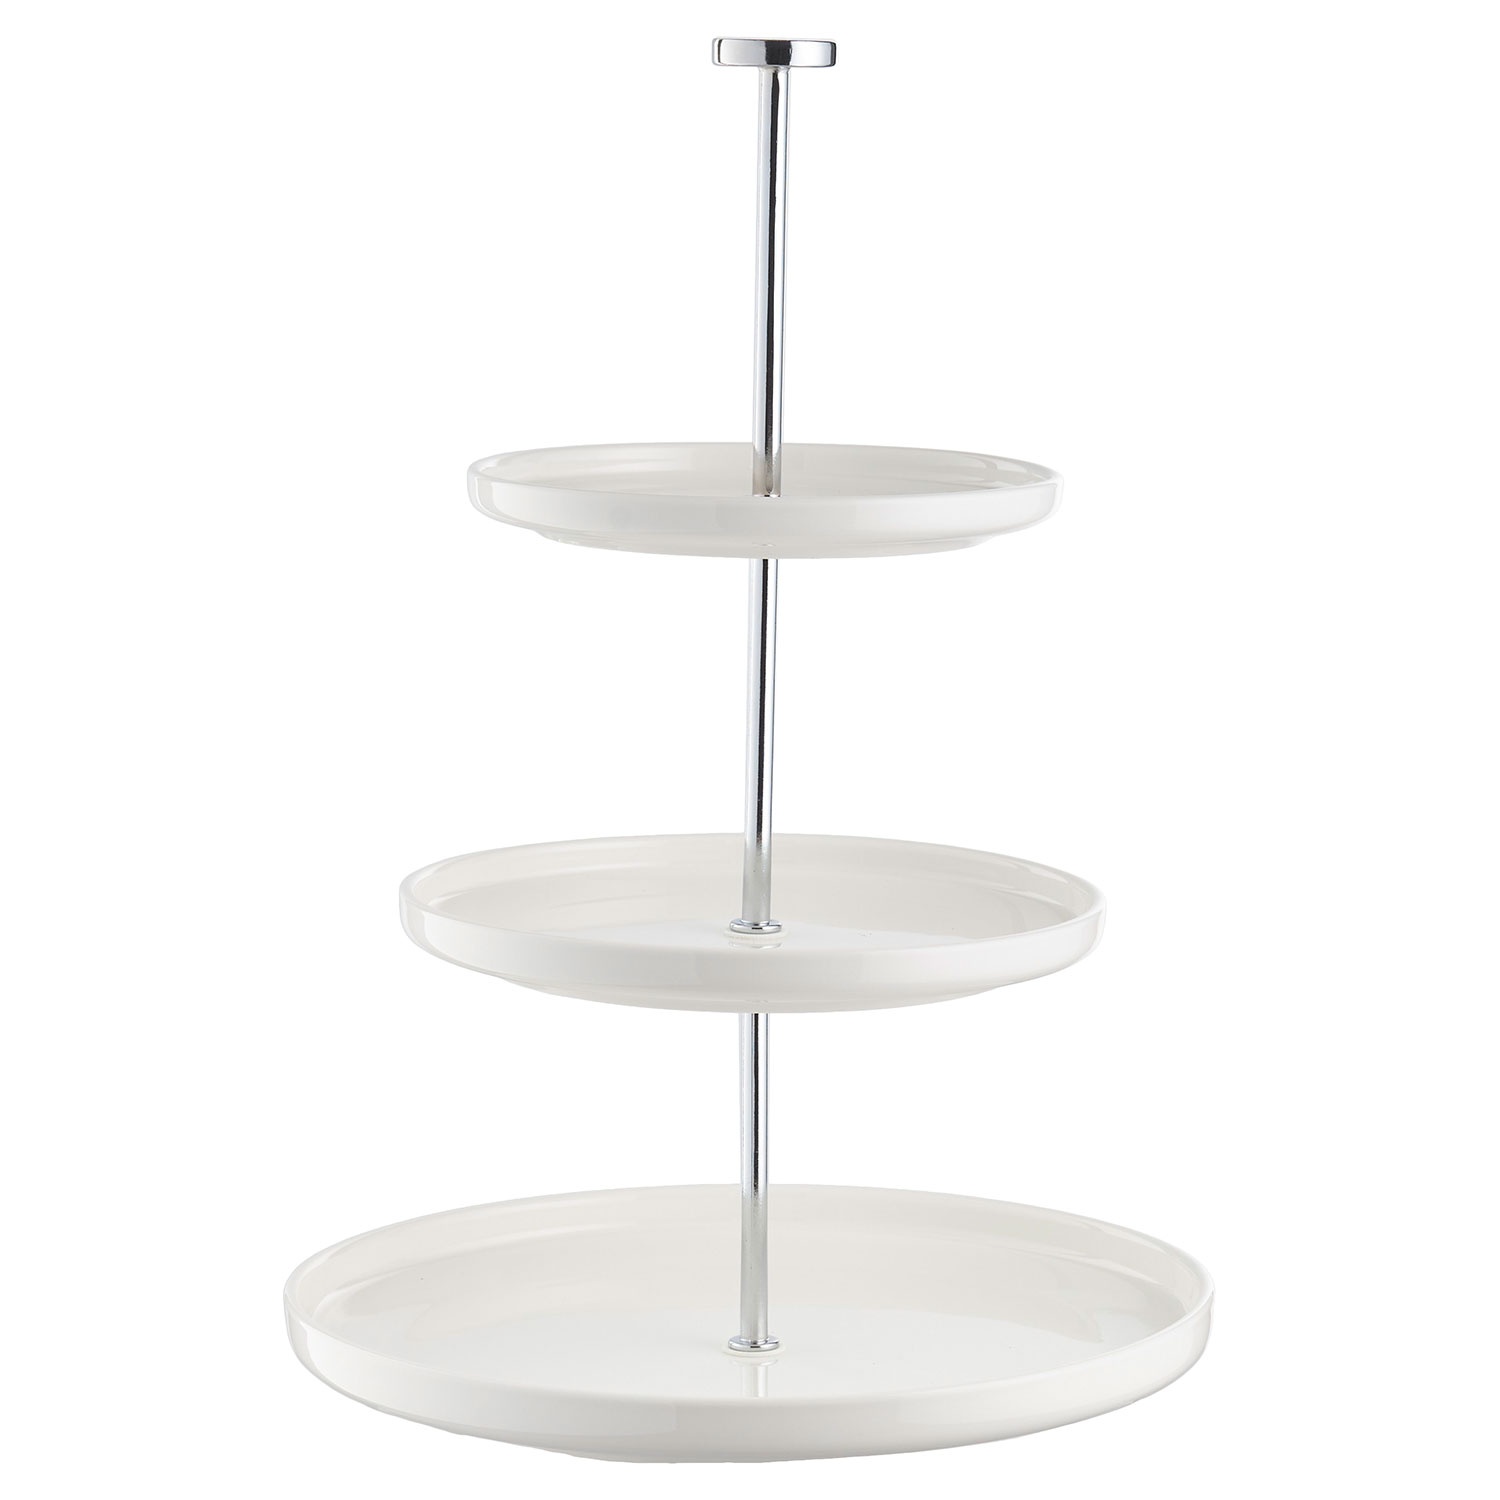 CROFTON® CHEF’S COLLECTION Etagere